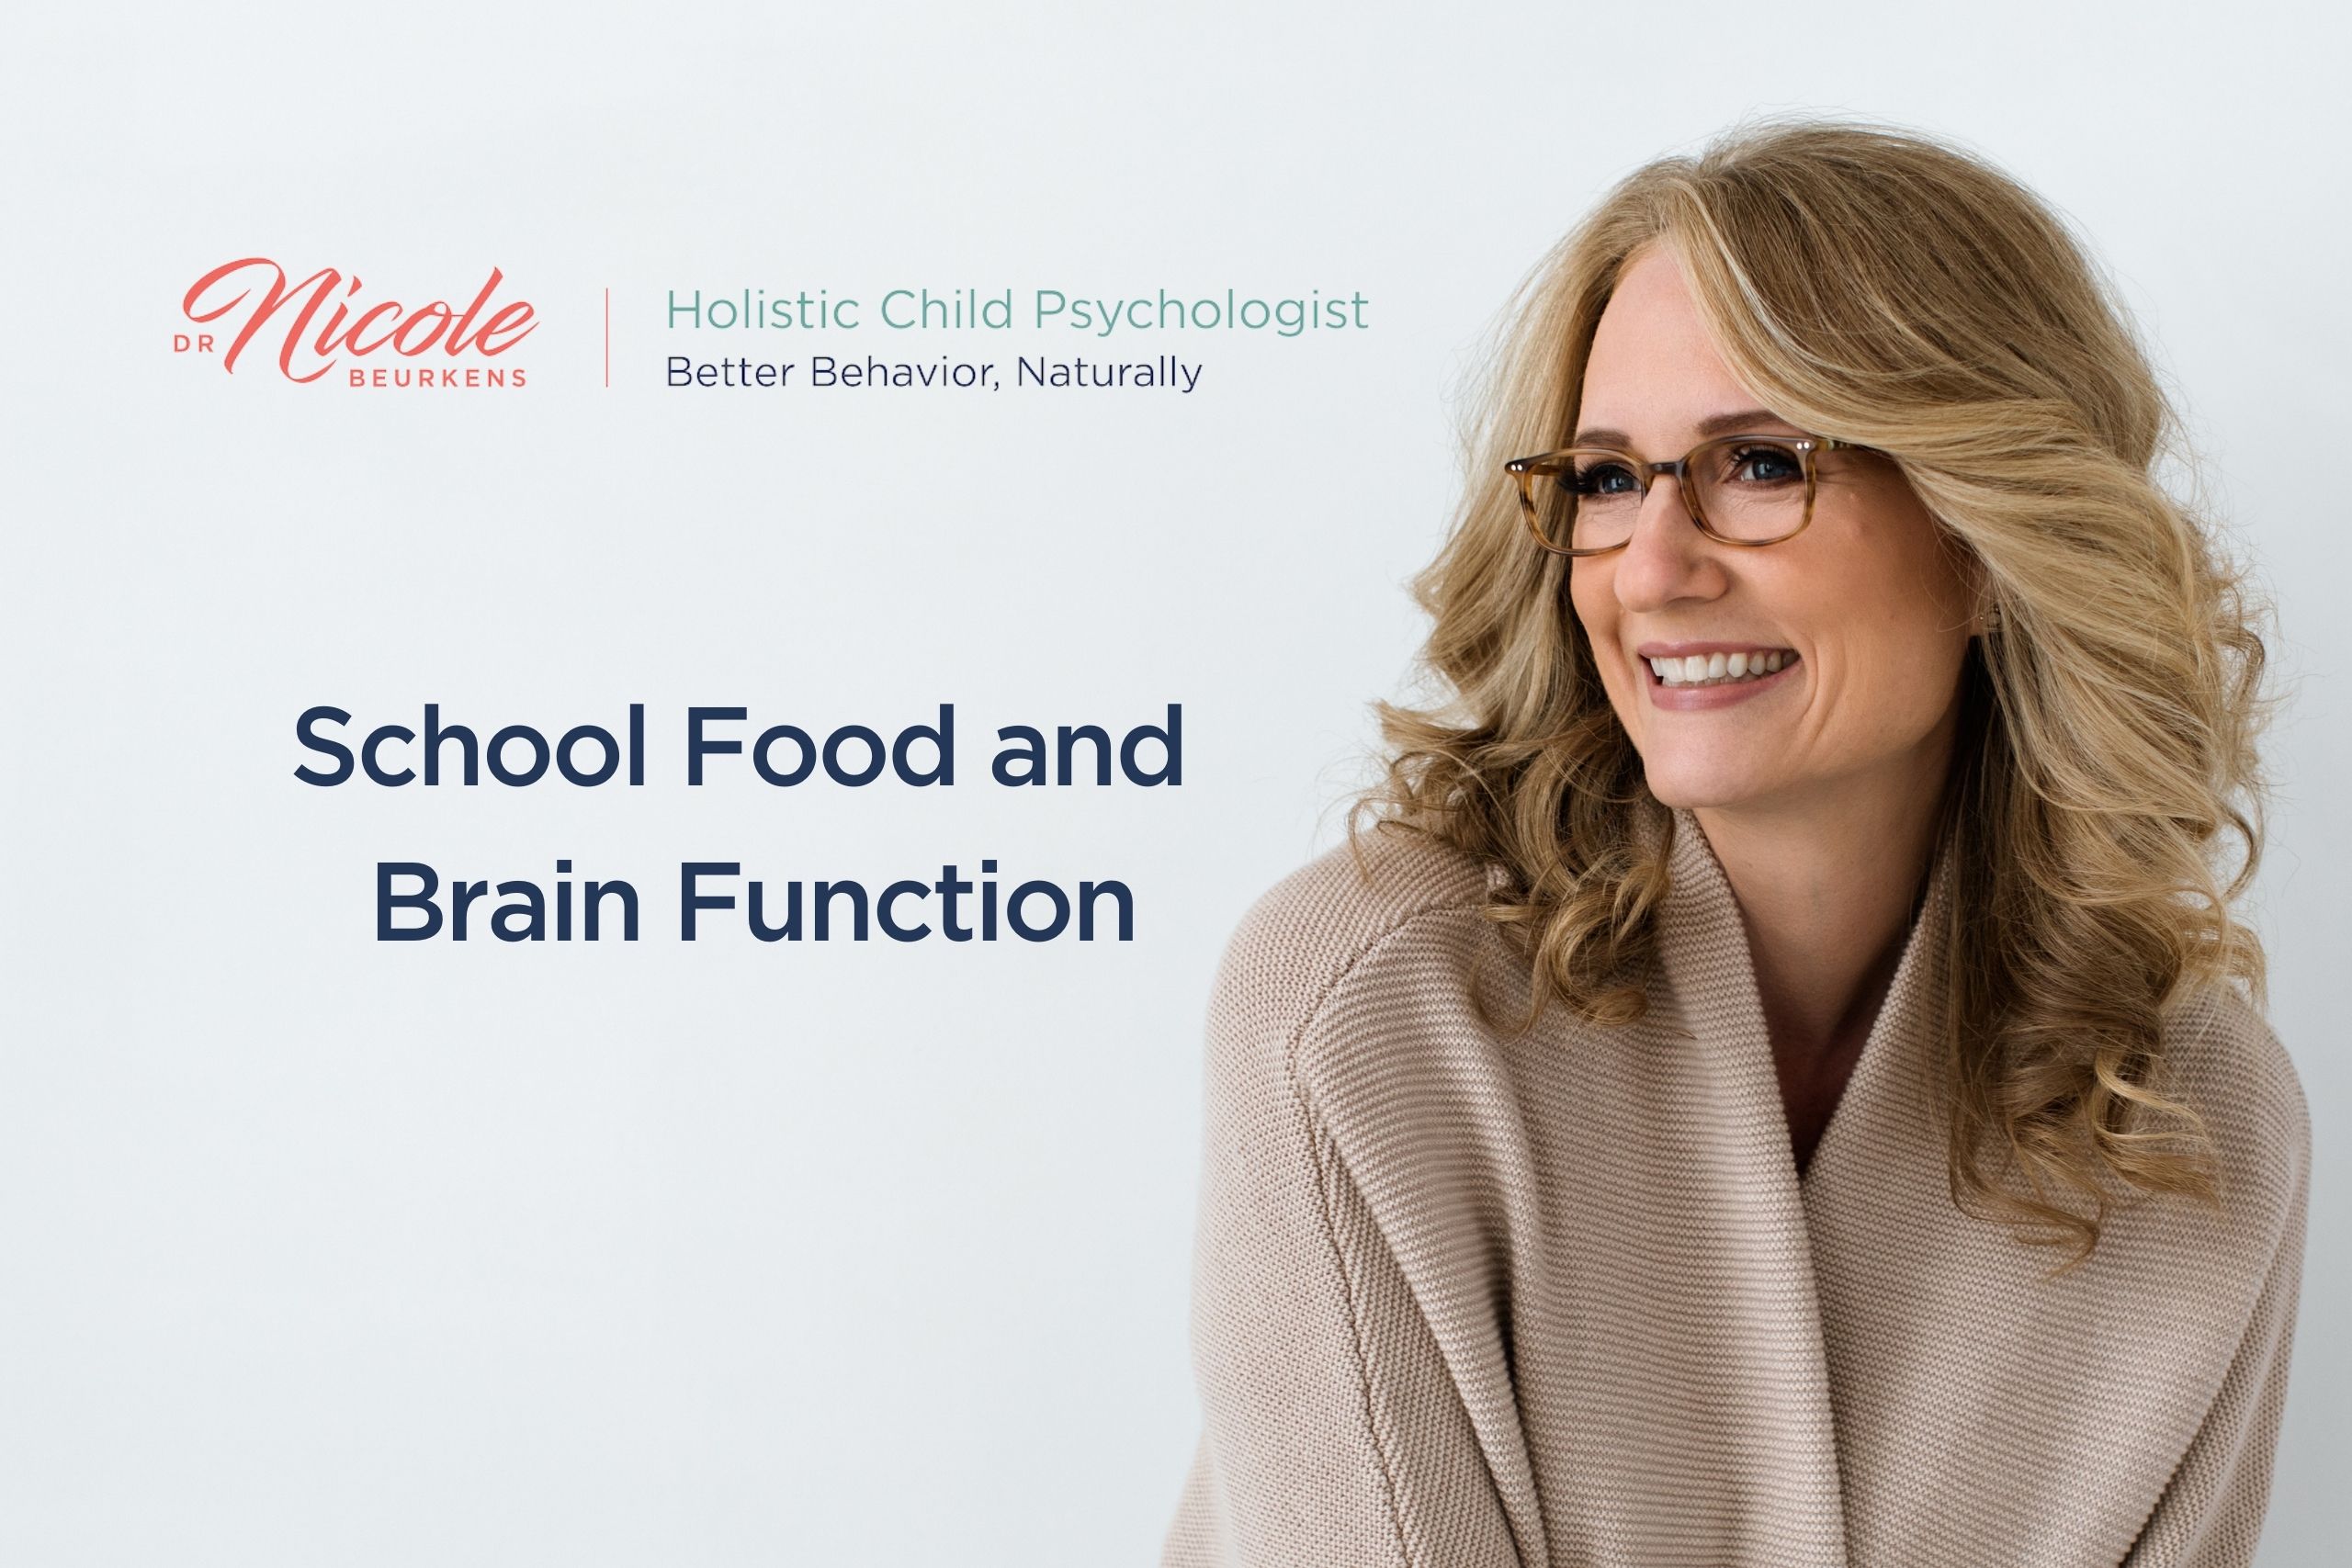 Impacts of School Food on Student Brain Function